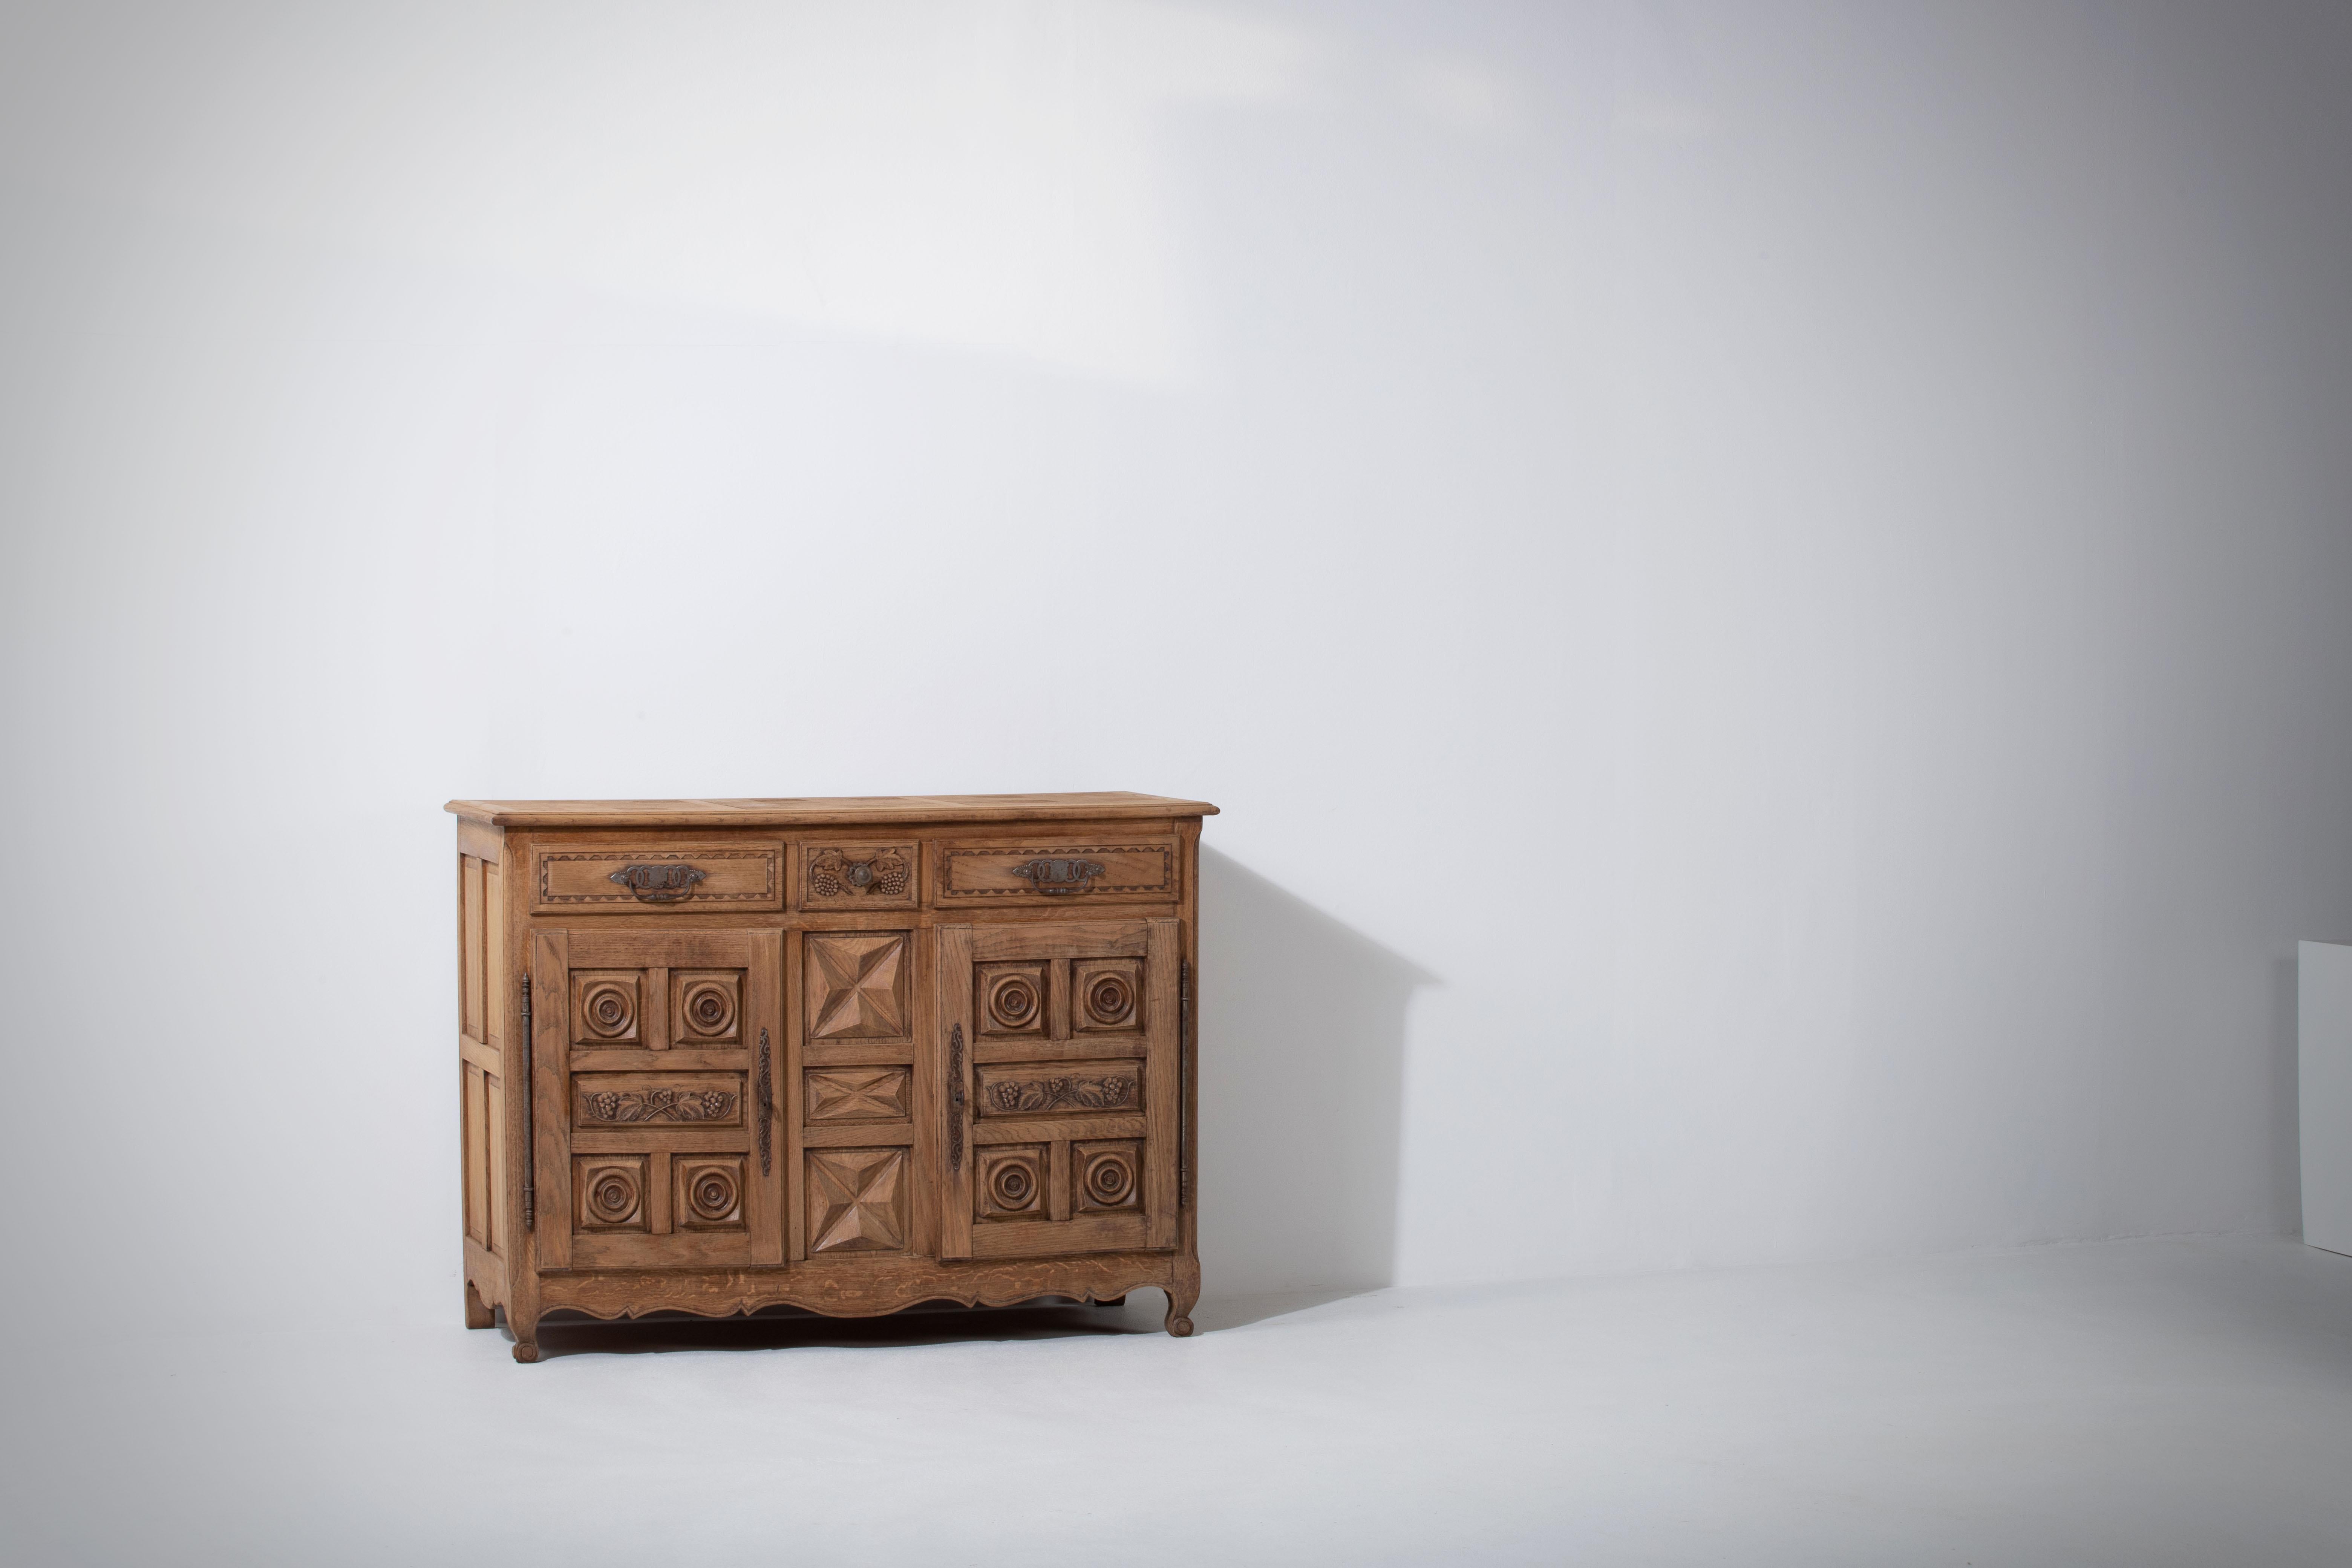 Unearthed in Normandy, this piece of furniture in solid oak will bring a touch of authenticity to an interior.
The sideboard consists of three compartments with shelves whose doors are covered with circular patterns typical of the region.
Good